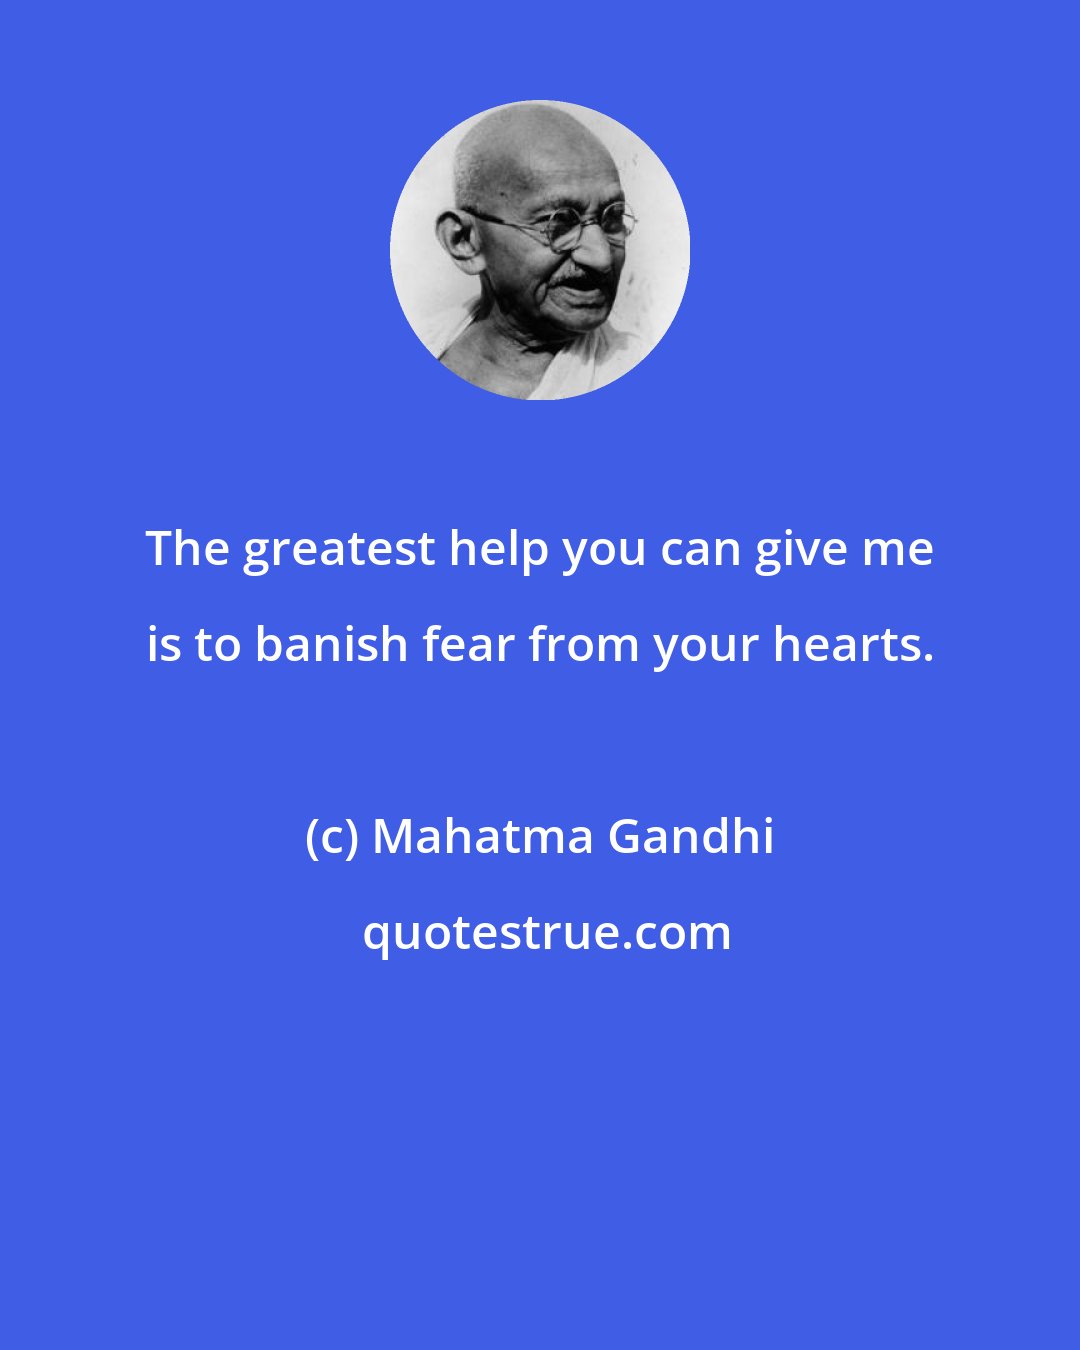 Mahatma Gandhi: The greatest help you can give me is to banish fear from your hearts.